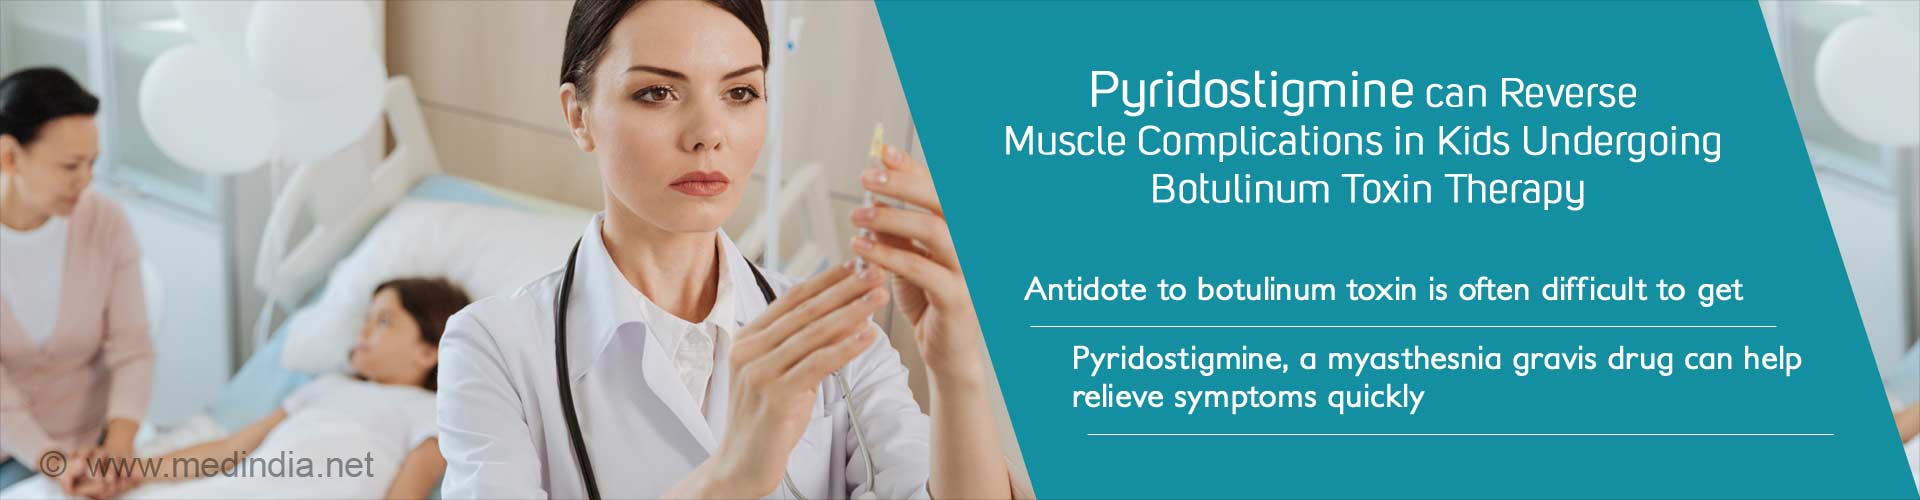 pyridostigmine can reverse muscle complications in kids undergoing botulium toxin therapy
- antidote to botulium toxin is often difficult to get
- pyridostigmine, a myathesnia gravis drug can help relieve symptoms quickly